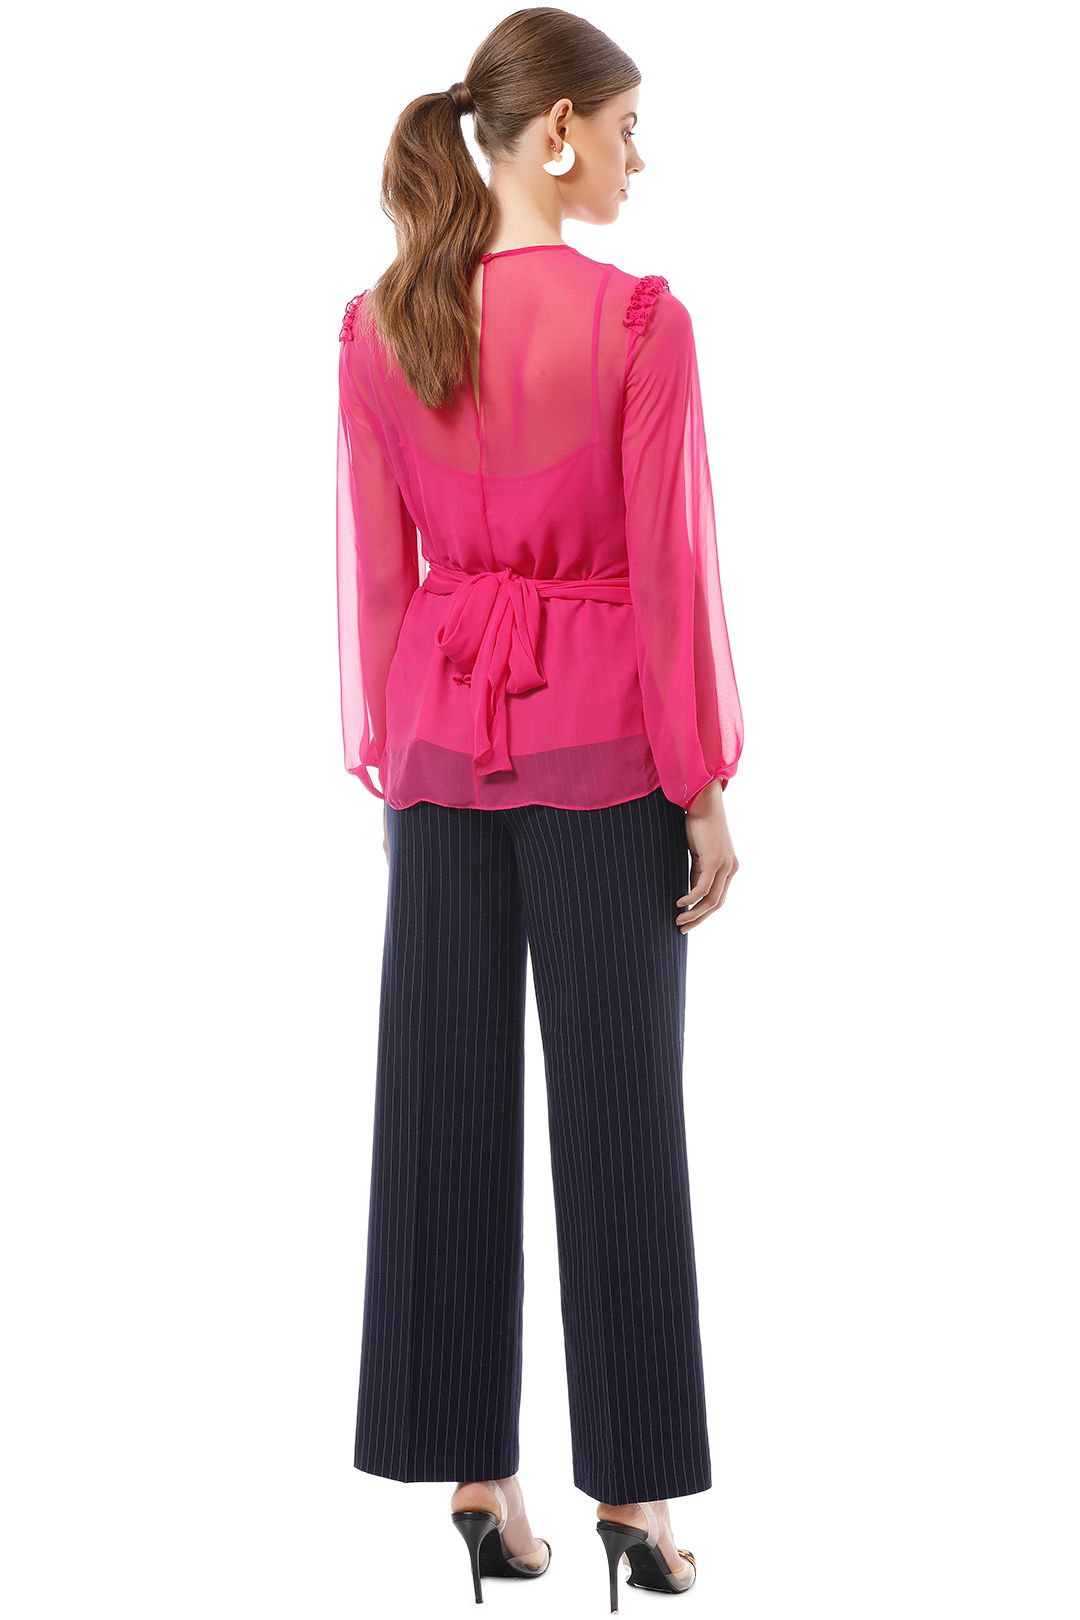 Camilla and Marc - Dylan Twist Top - Pink - Back